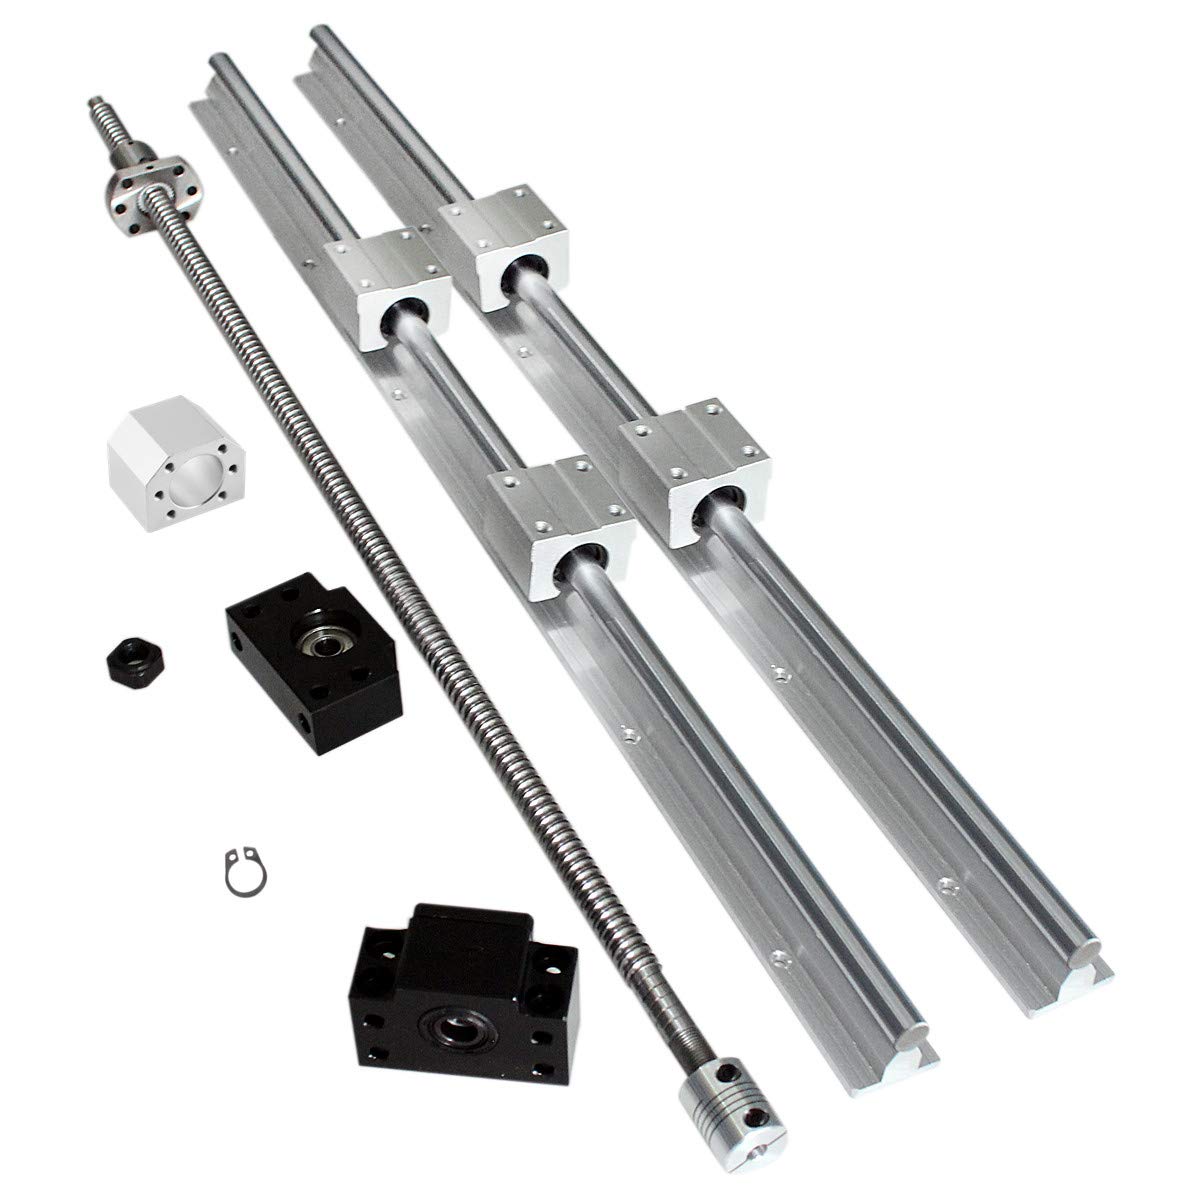 Linear Rail 2PCS SBR12-400MM Linear Guide 2 Linear Guide Rails and 4 Square Type Carriage Bearing Blocks,CNC Rail Kit,Linear Rails and Bearings Kit Automated Machines and Equipments